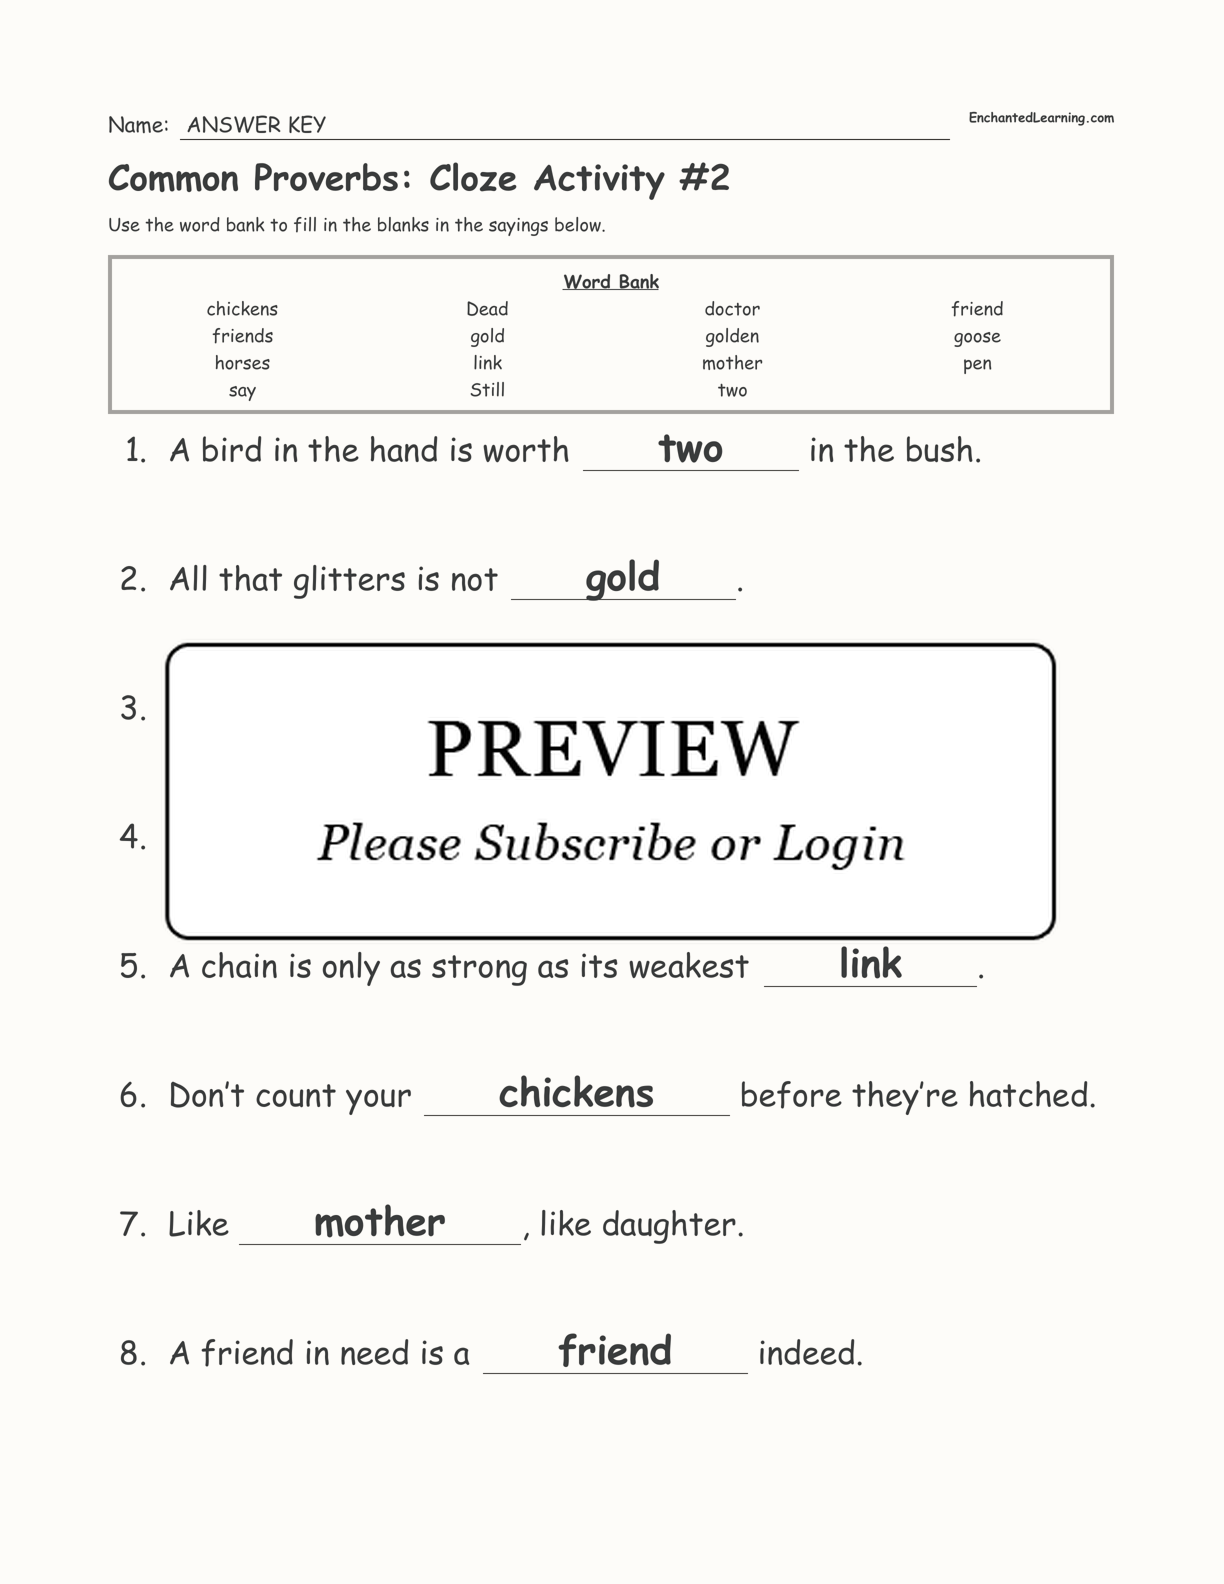 Common Proverbs: Cloze Activity #2 interactive worksheet page 3